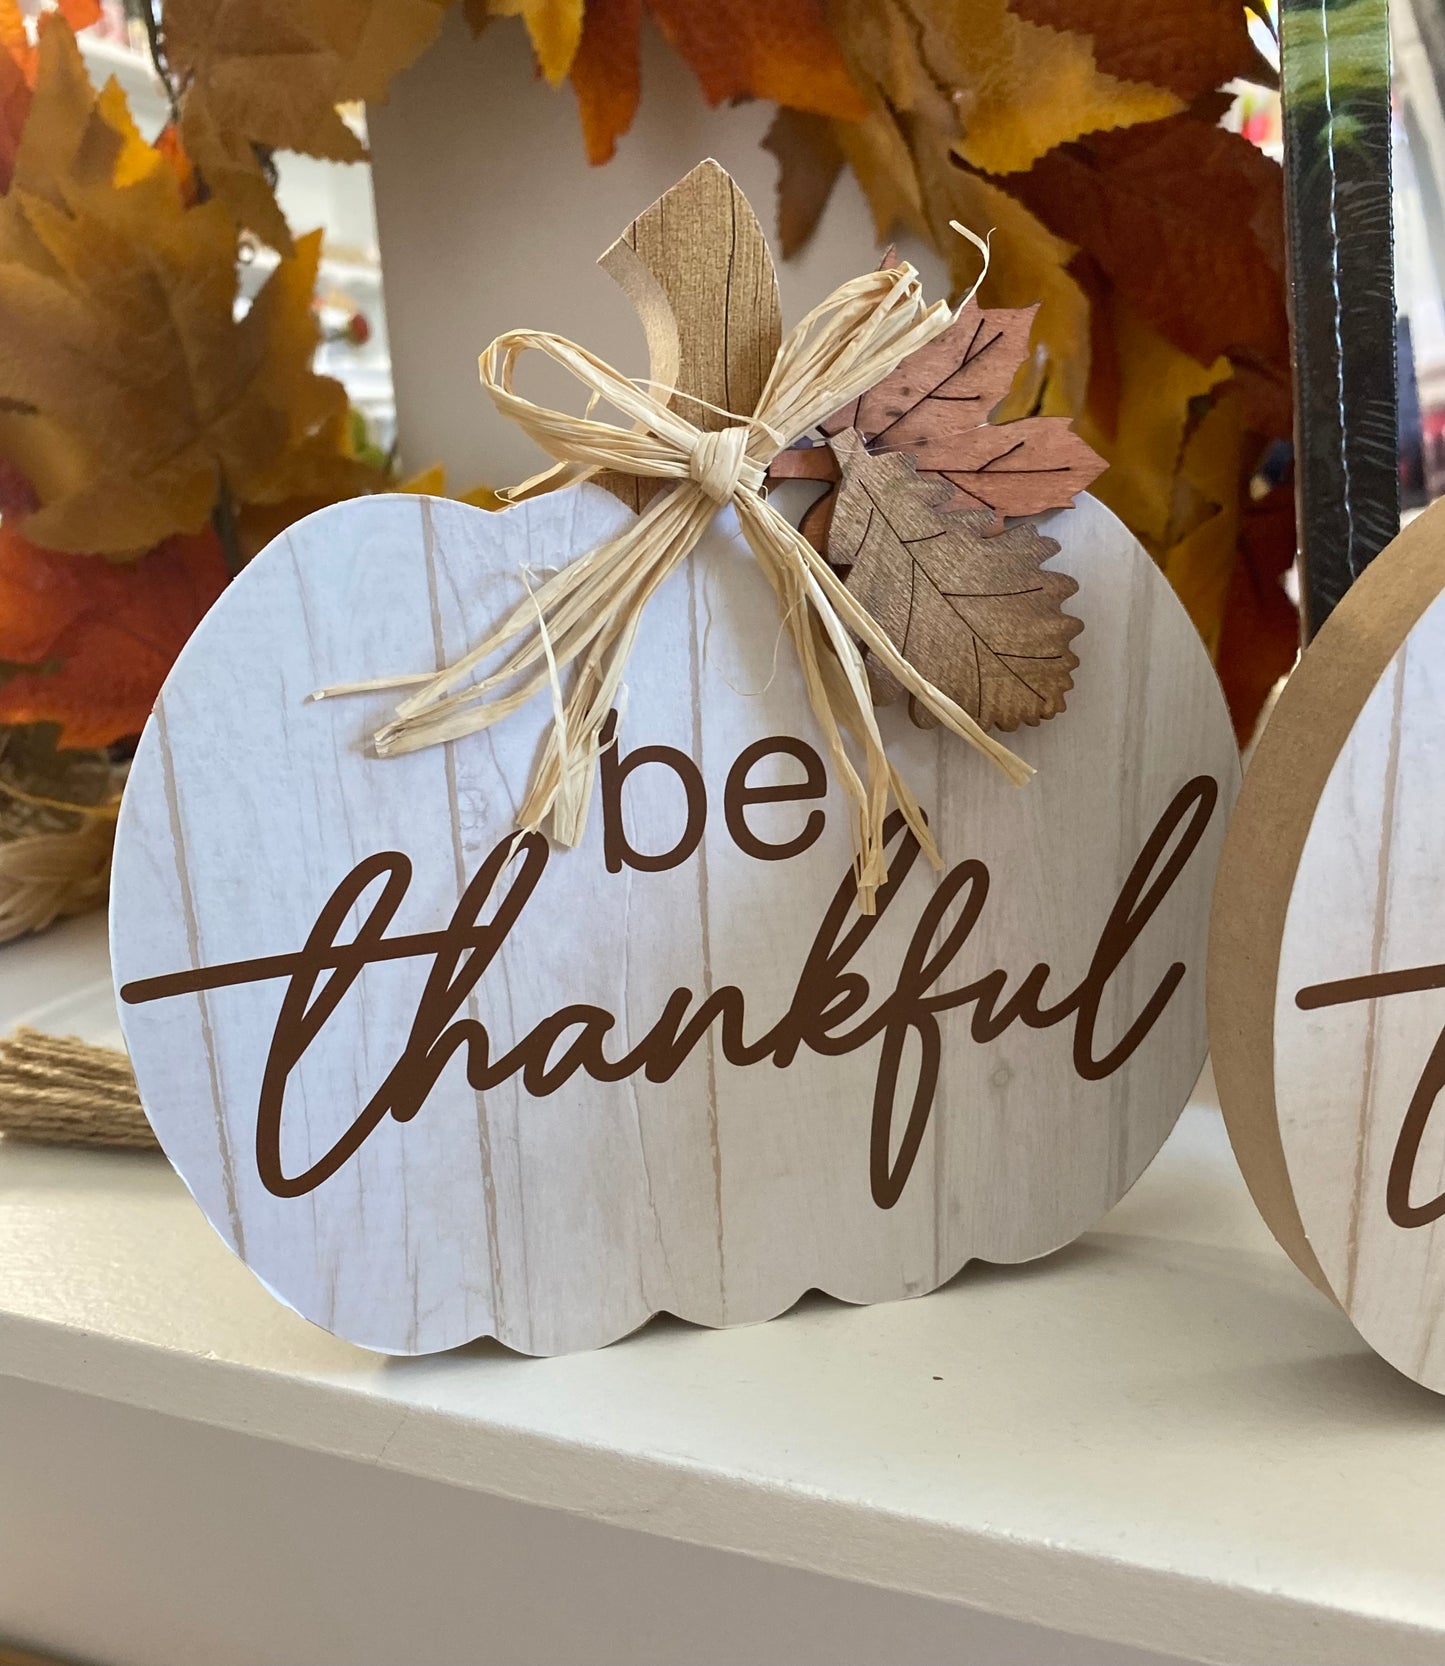 Pumpkin with sentiment “be thankful”